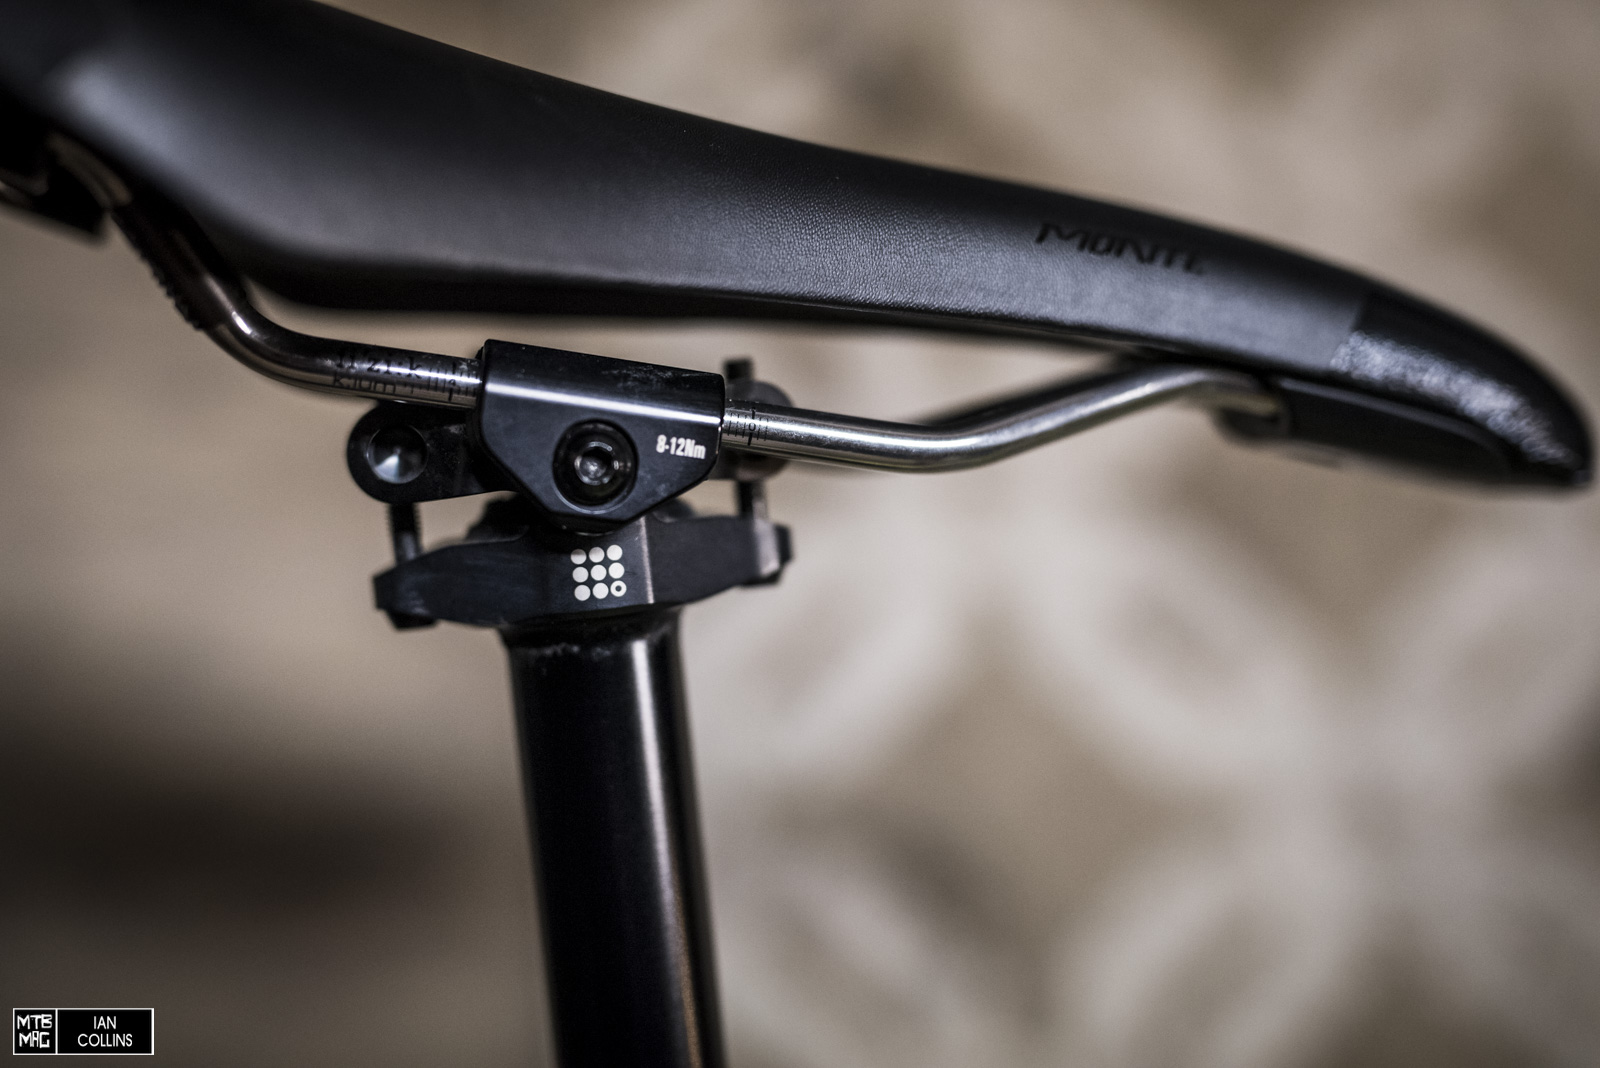 Four separate black anodized titanium screws independently secure the saddle rails.